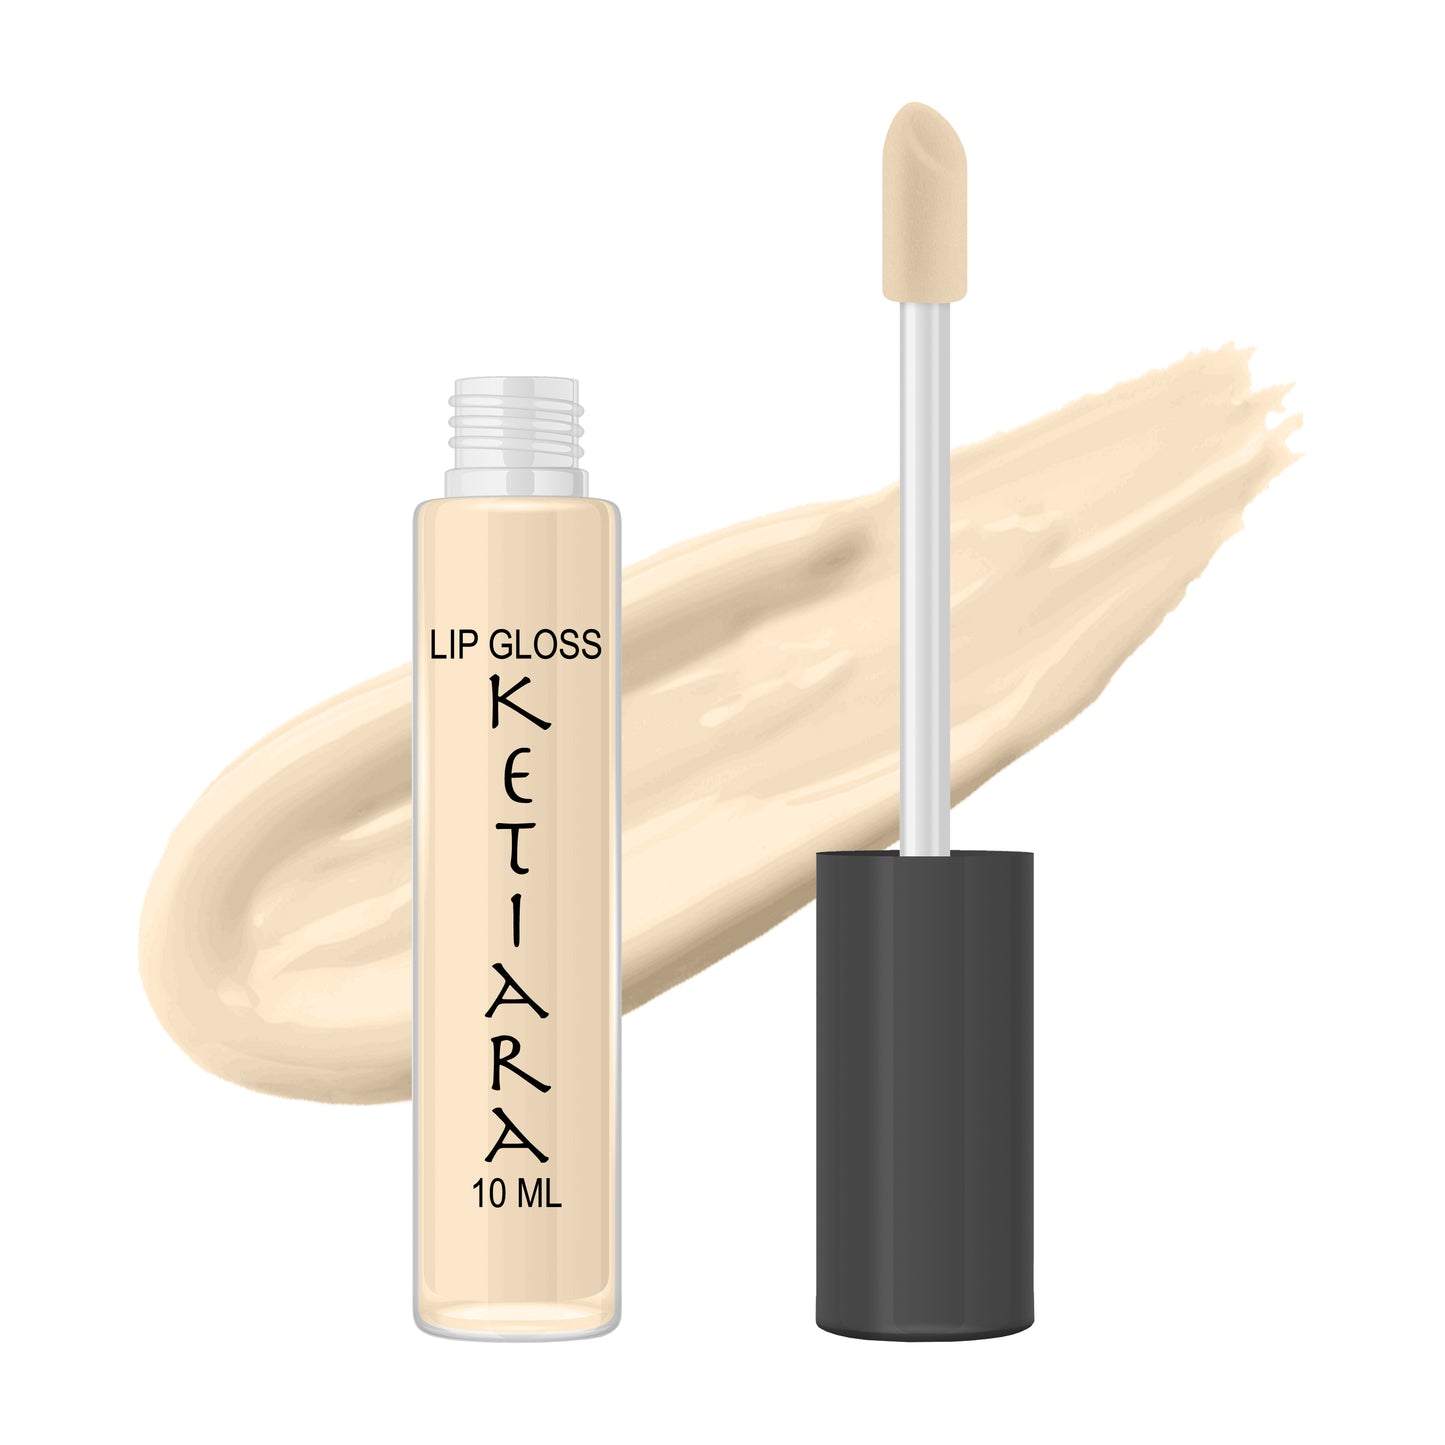 Blanched Almond Hydrating And Moisturizing Non-sticky Premium Mild Tinting Lip Gloss Infused With Hyaluronic Acid